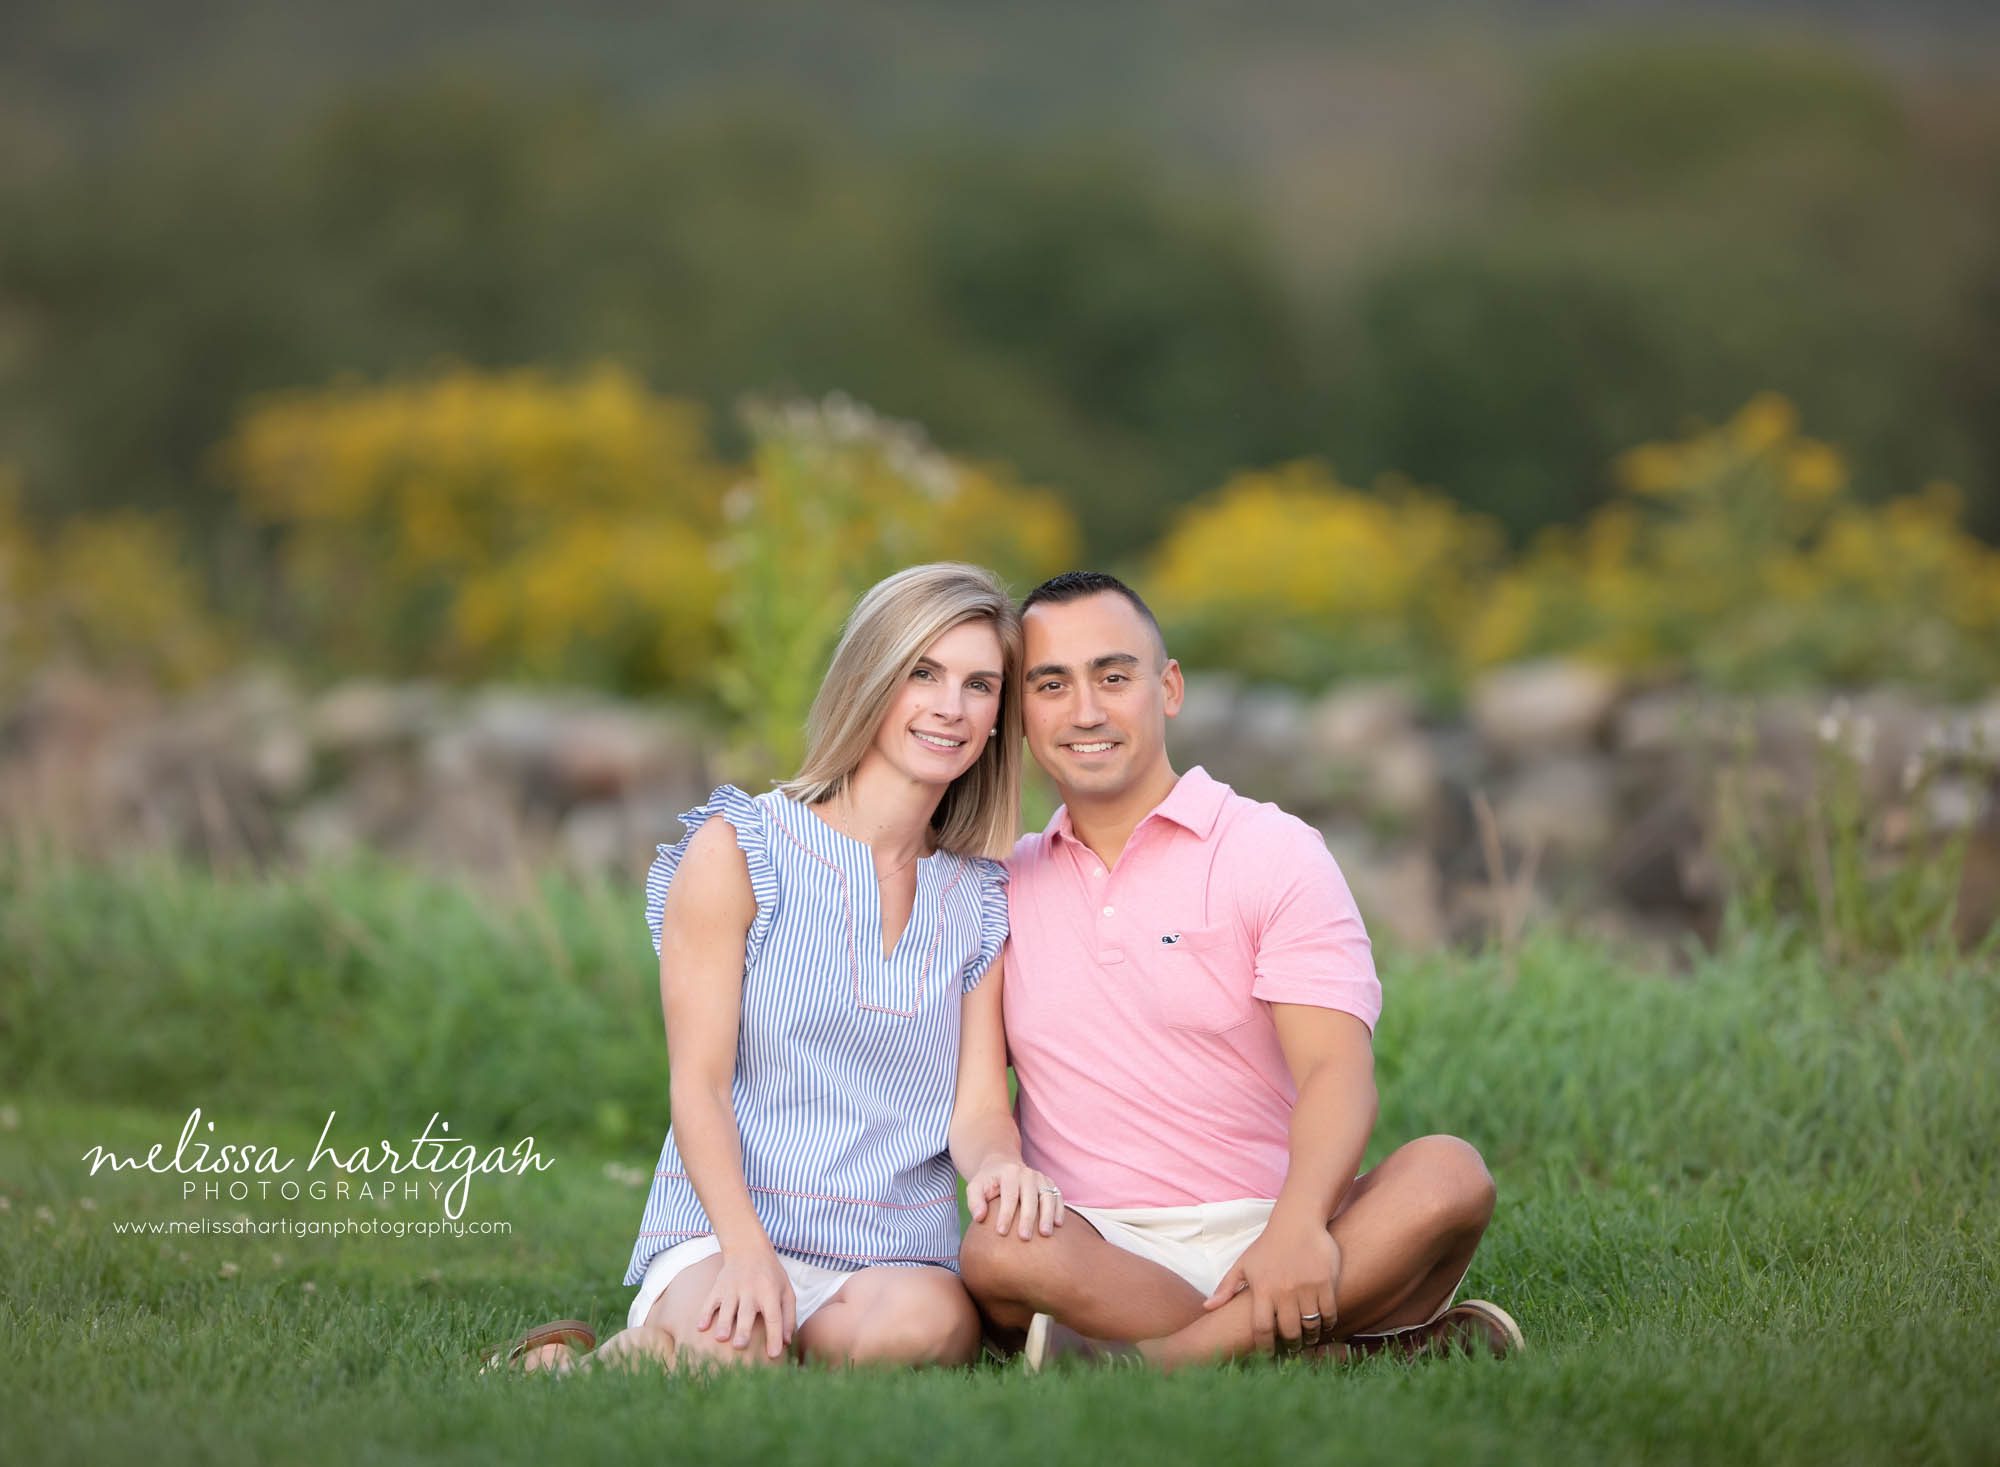 mom dad together couples photo family photography session Hartford county ct Family Photographer